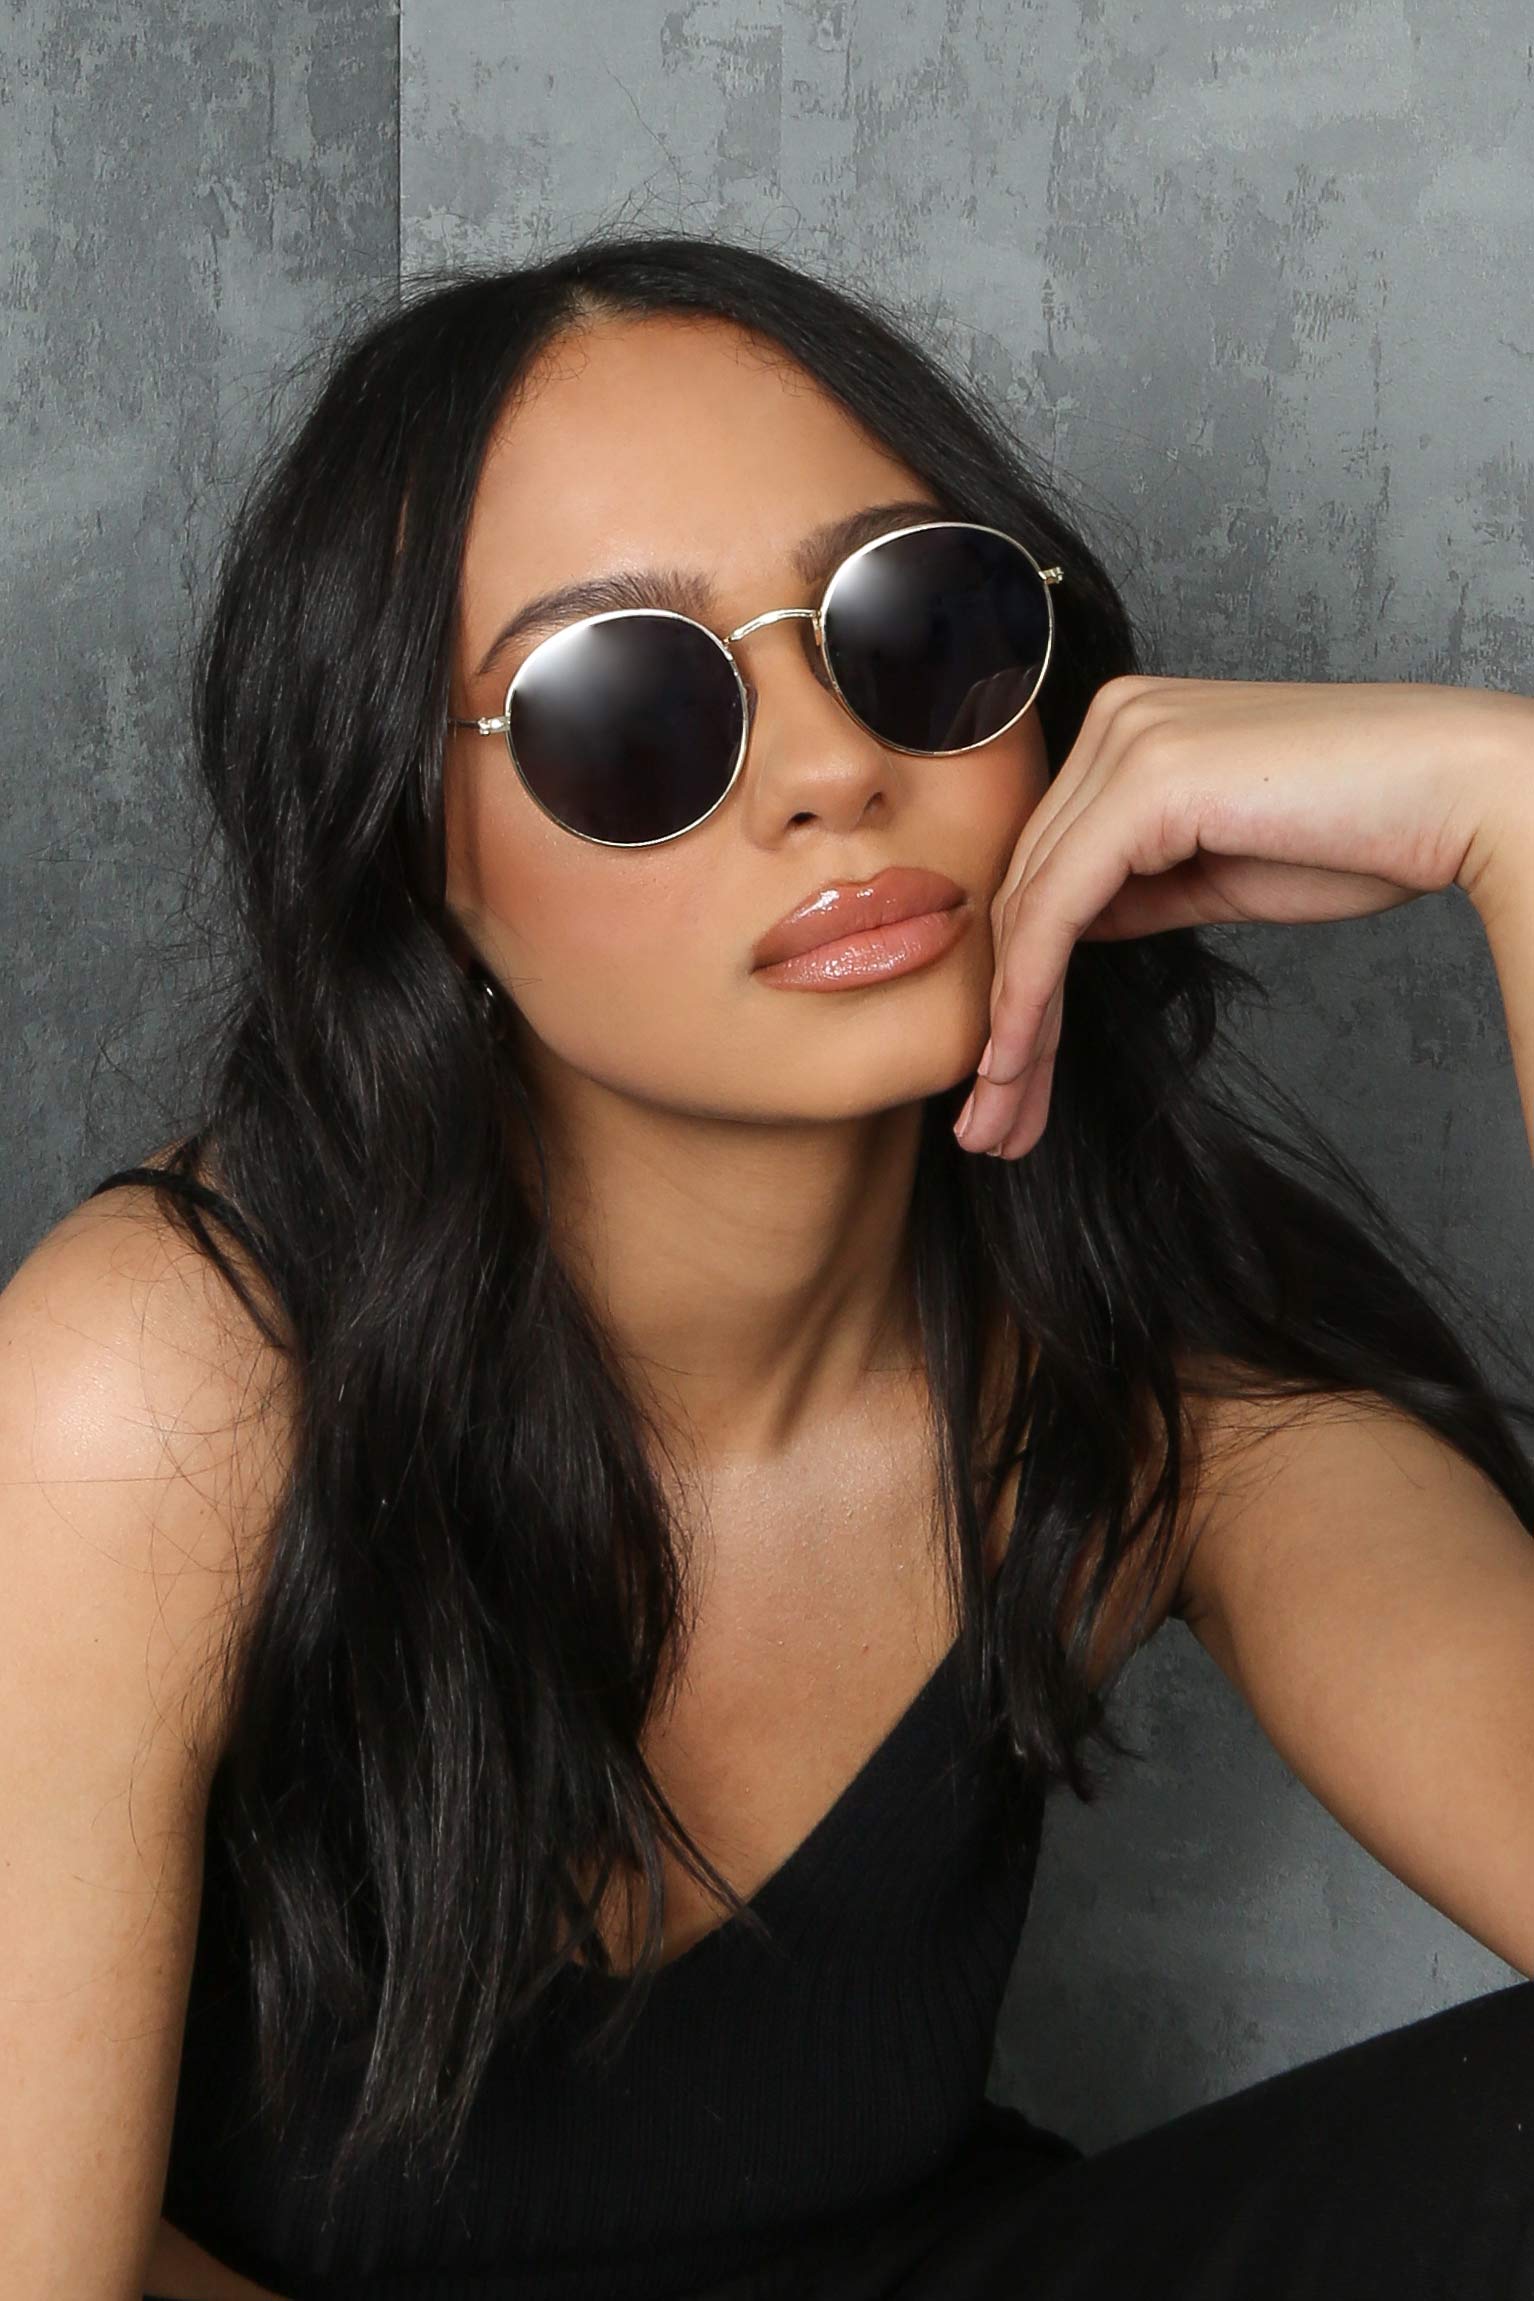 Tinted Gold Frame Round Sunglasses